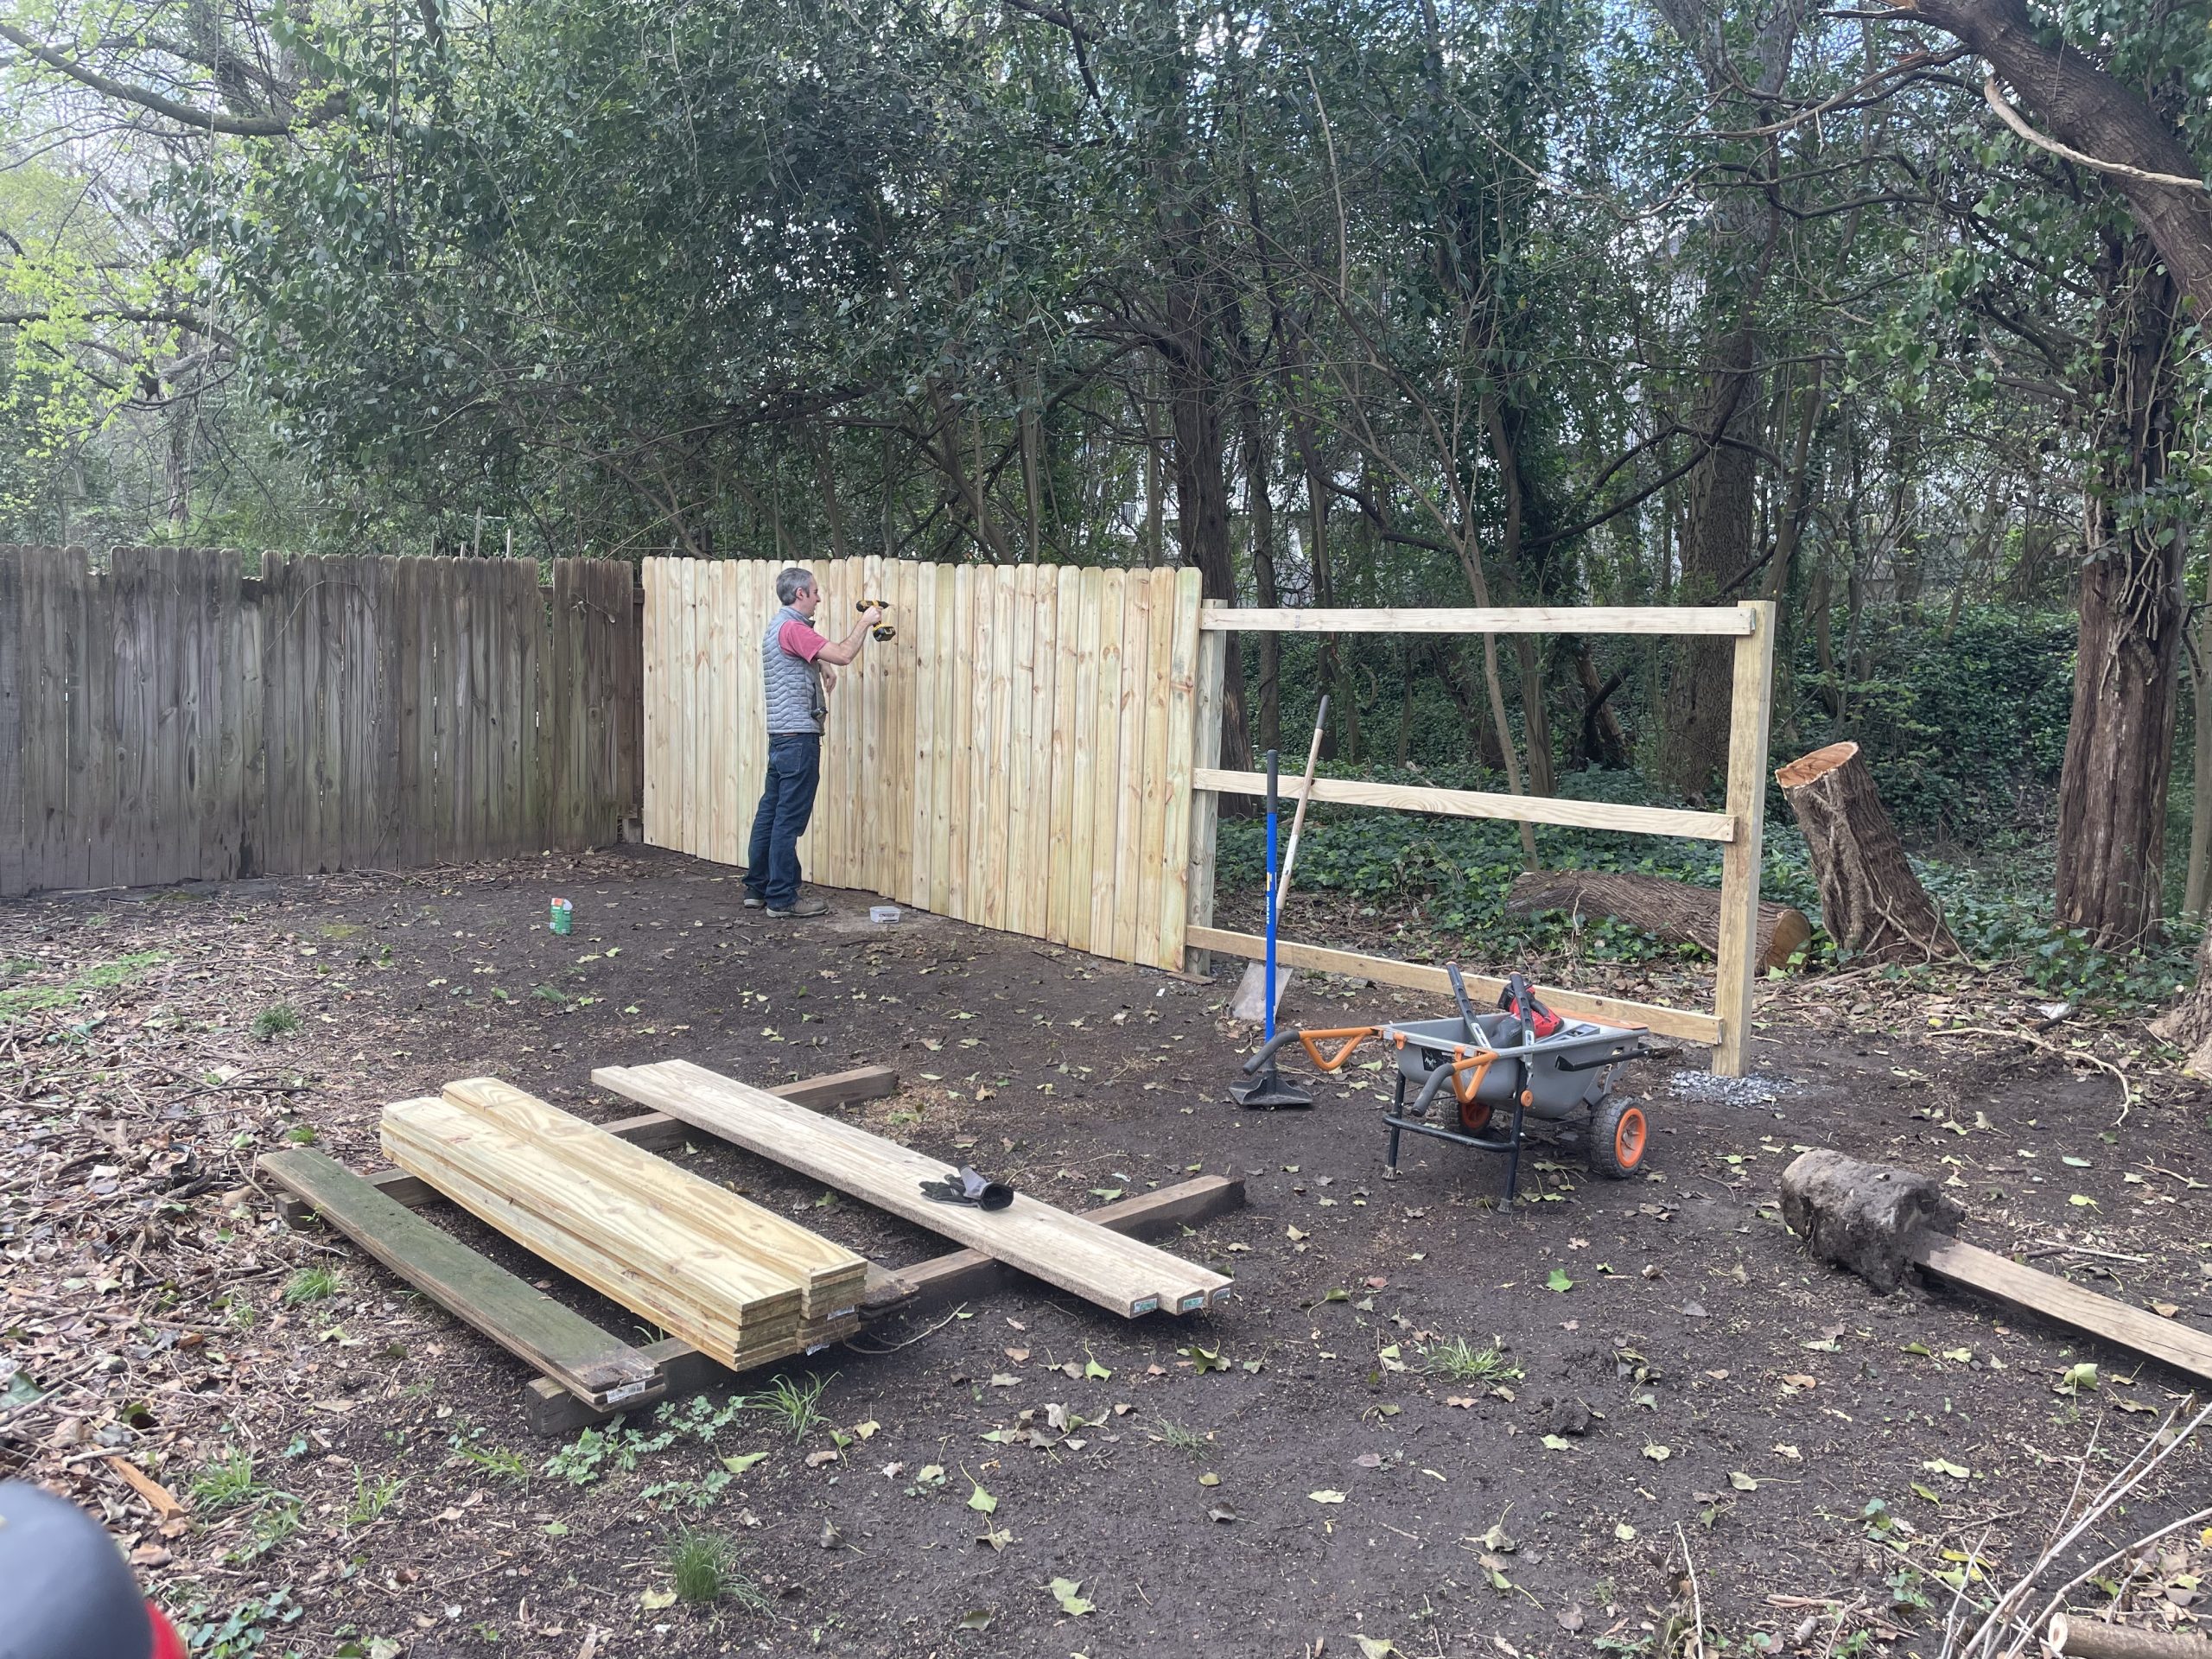 corey using a power drill on the half-finished fence